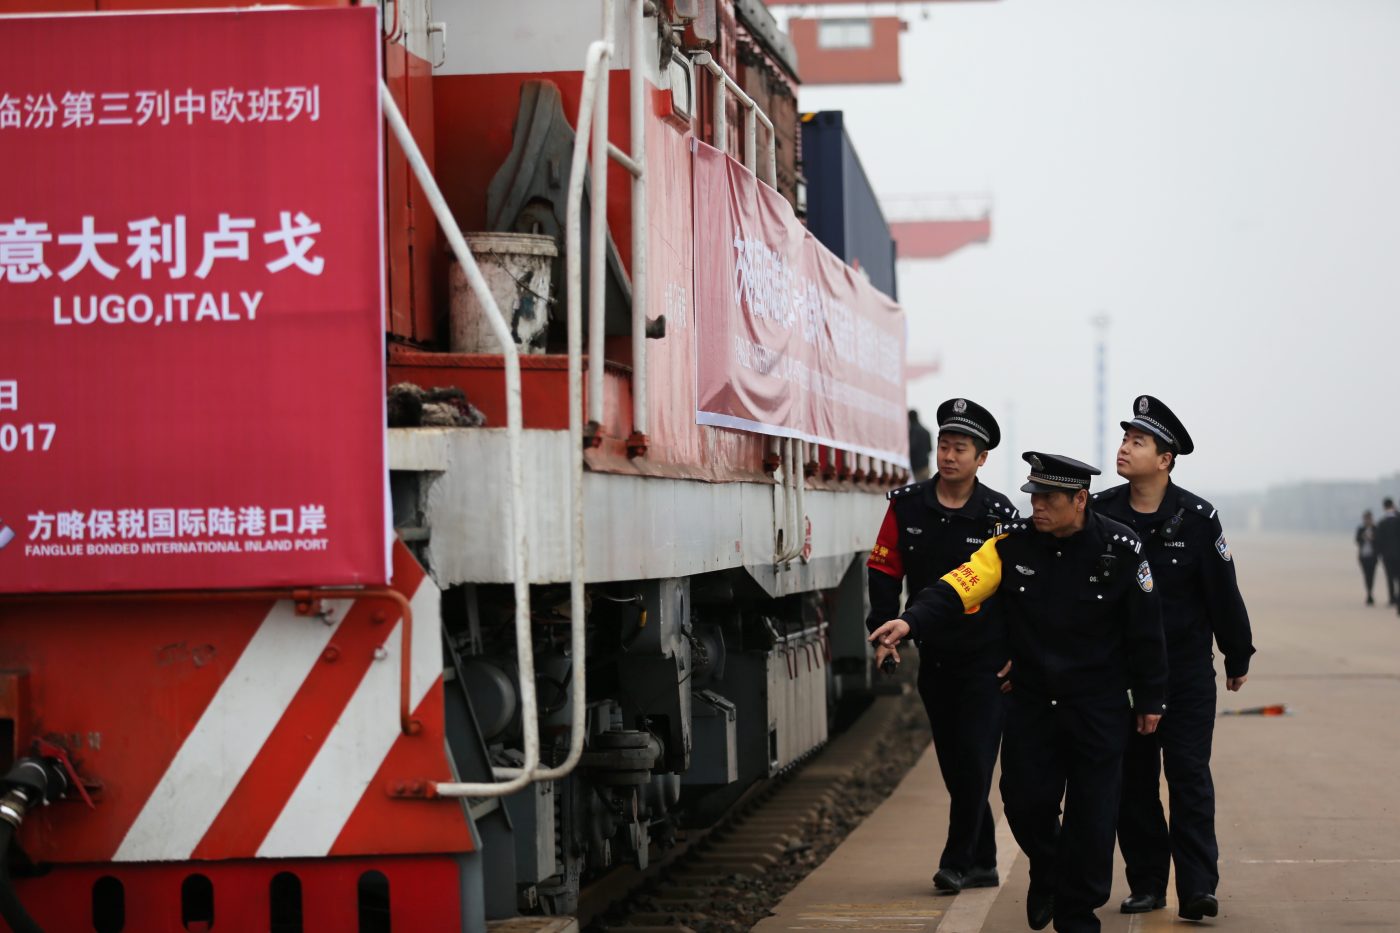 Photo: Chinese police officers check a freight train of China Railway Express running from Linfen to Italy's Lugo before departing from the north Houma station in Linfen city, north China's Shanxi province, 25 October 2017. A freight train headed for Lugo, Italy, had departed from the north Houma station in Linfen city, north China's Shanxi province, 25 October 2017. This freight train will travel along the Silk Road Economic Belt through Romania, Poland, Czech Republic and France. Thanks to the freight line, transport times and transport costs have been drastically reduced. Credit: Oriental Image via Reuters Connect